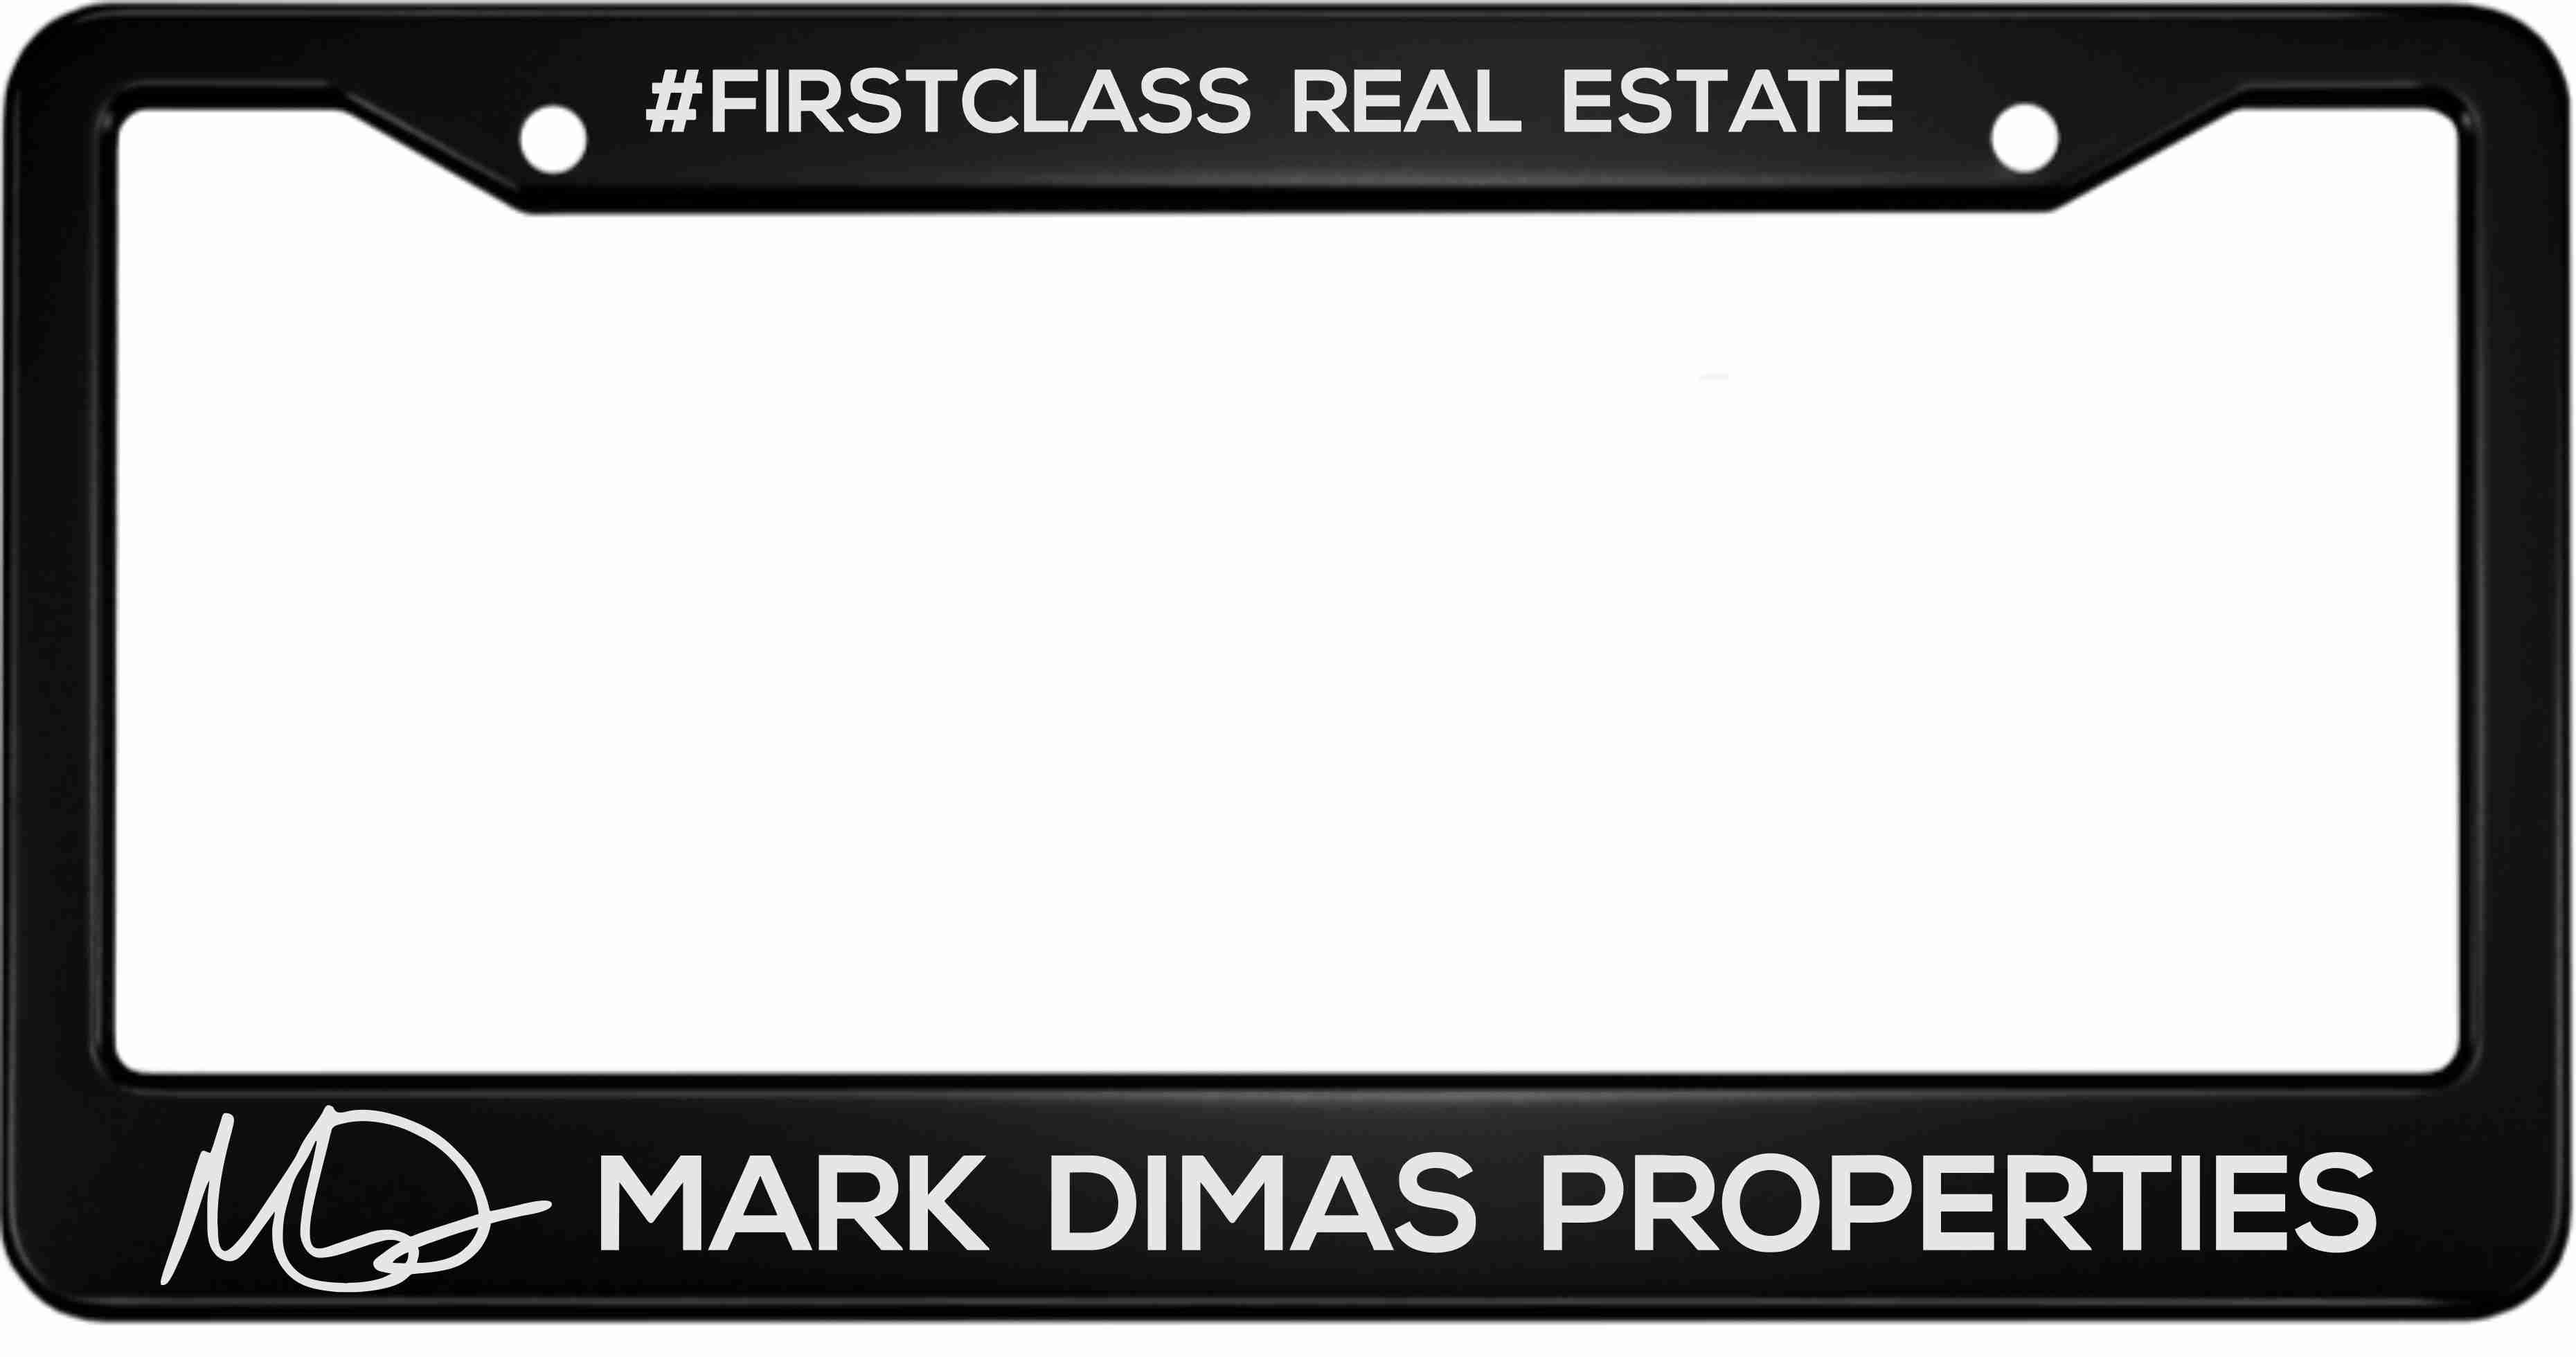 Mark Dimas Properties - Personalized anodized aluminum license plate frame (Special Edition)